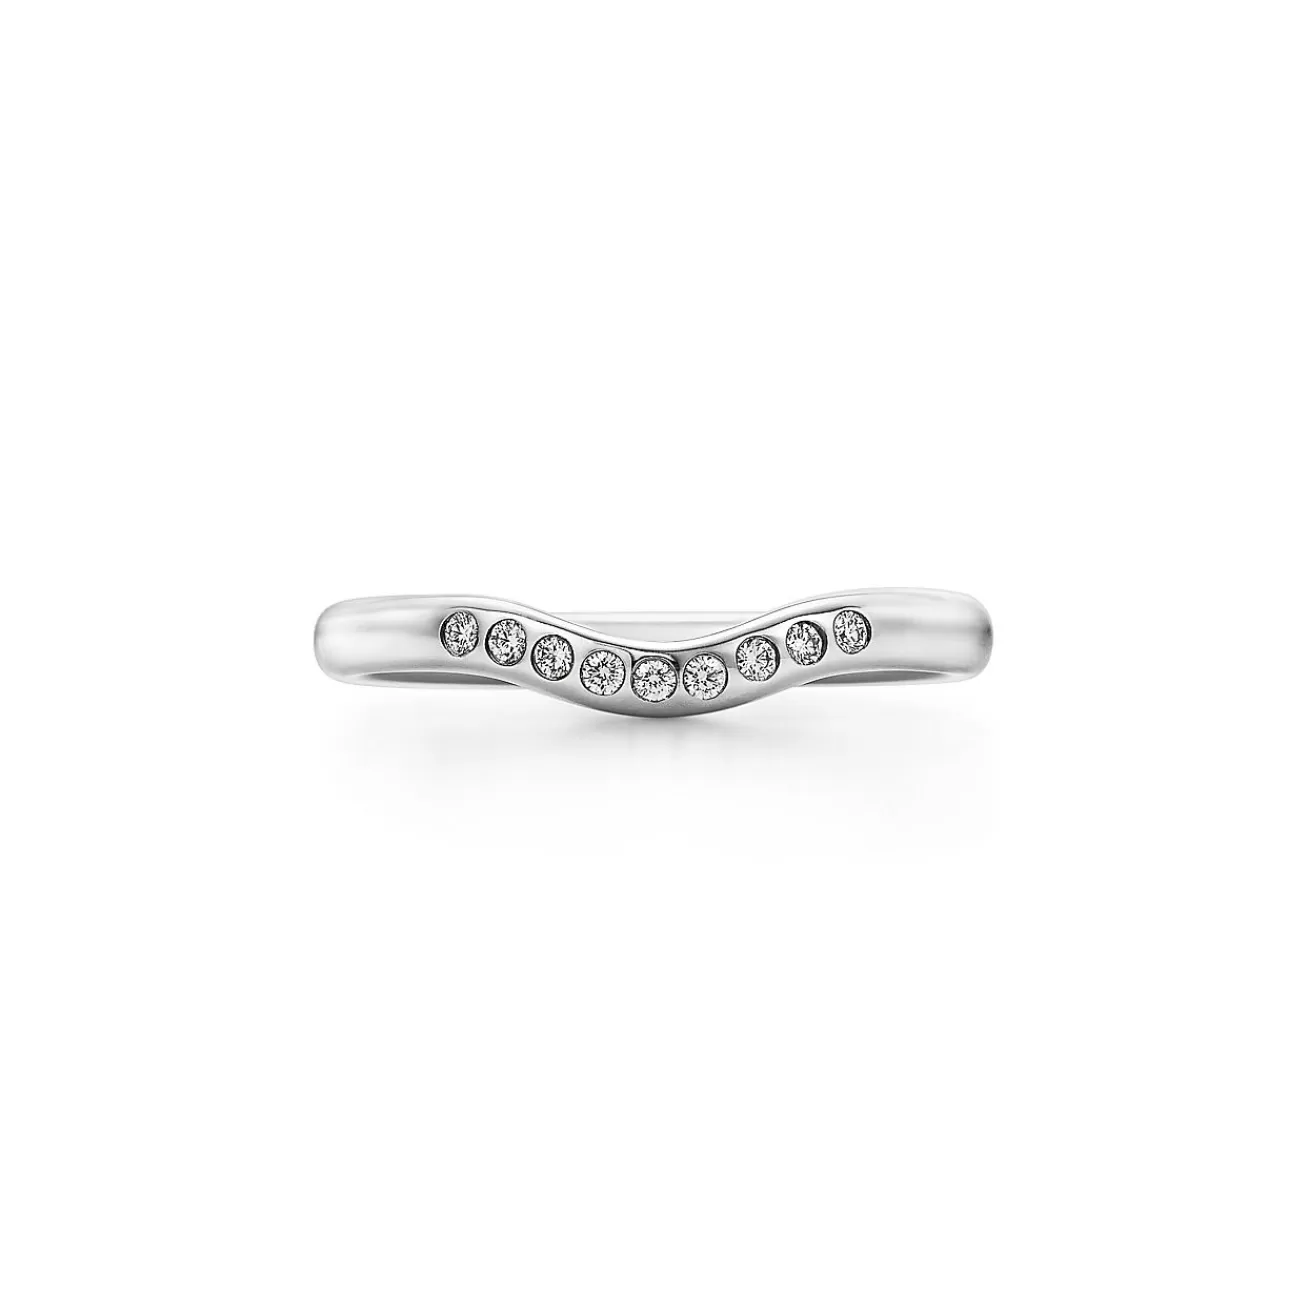 Tiffany & Co. Elsa Peretti® wedding band ring with diamonds in platinum. | ^ Rings | Stacking Rings